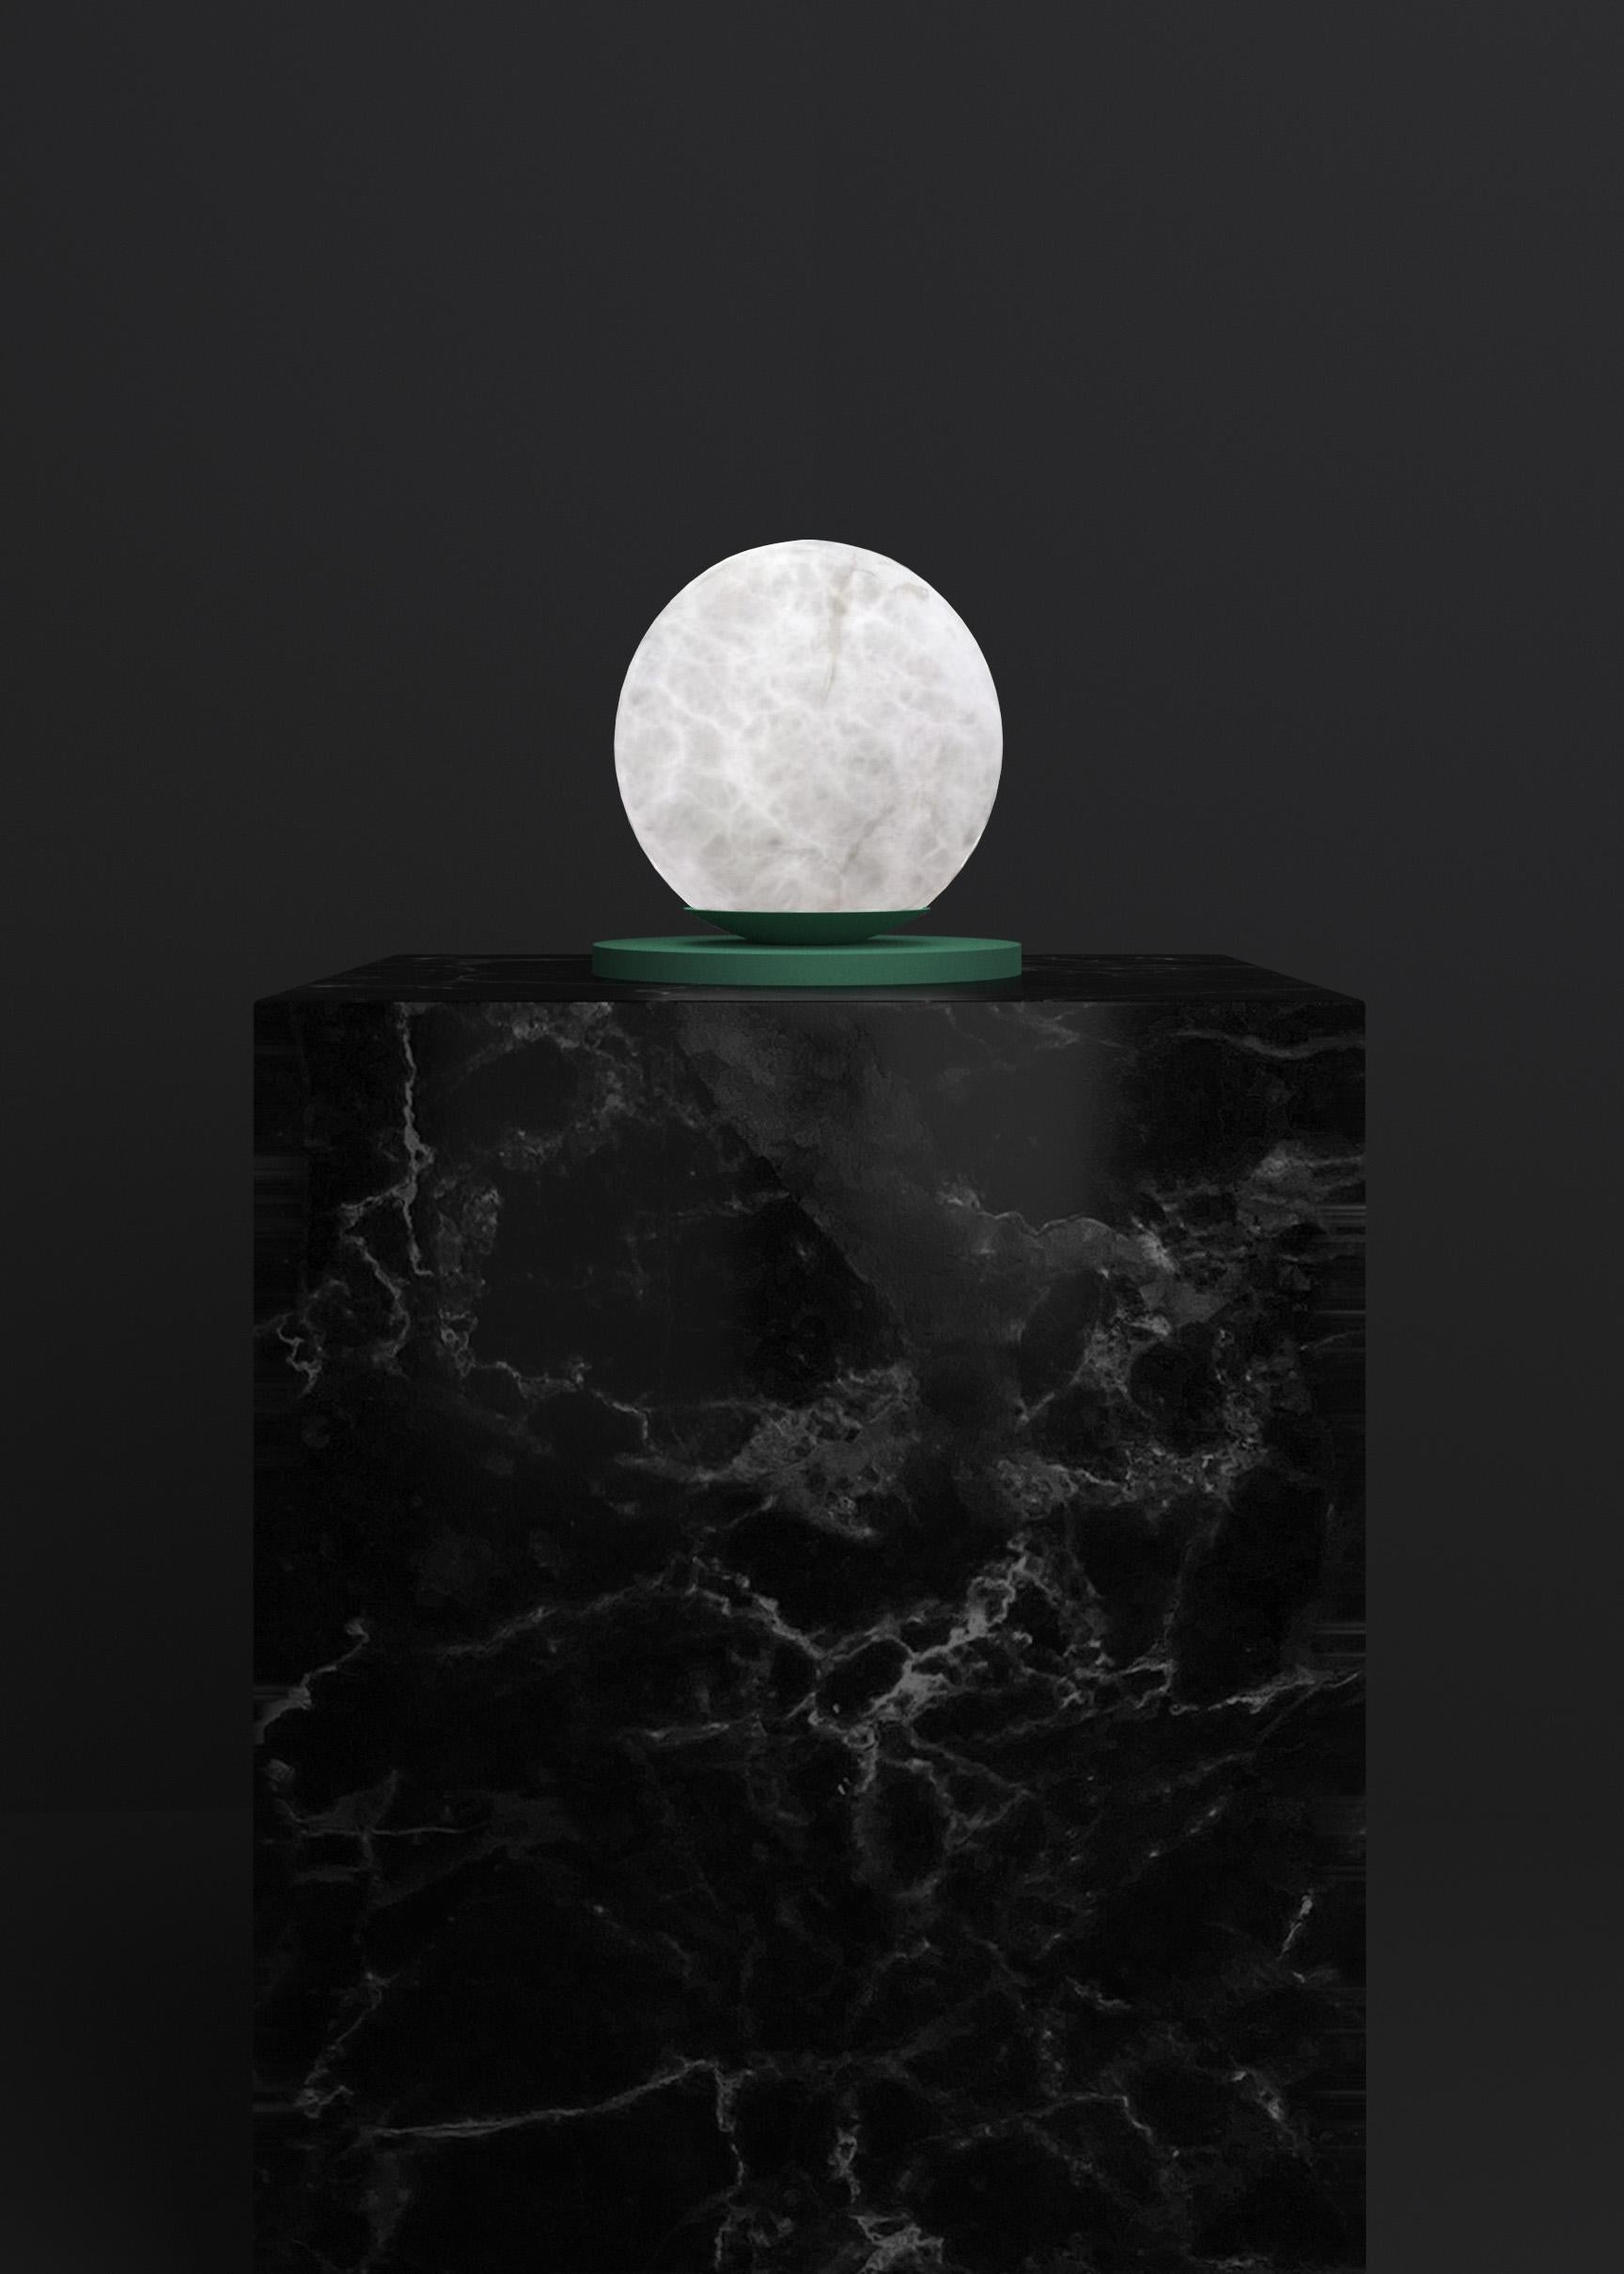 Ofione Freedom Green Metal Table Lamp by Alabastro Italiano
Dimensions: D 16 x W 16 x H 16 cm.
Materials: White alabaster and metal.

Available in different finishes: Shiny Silver, Bronze, Brushed Brass, Ruggine of Florence, Brushed Burnished, Shiny